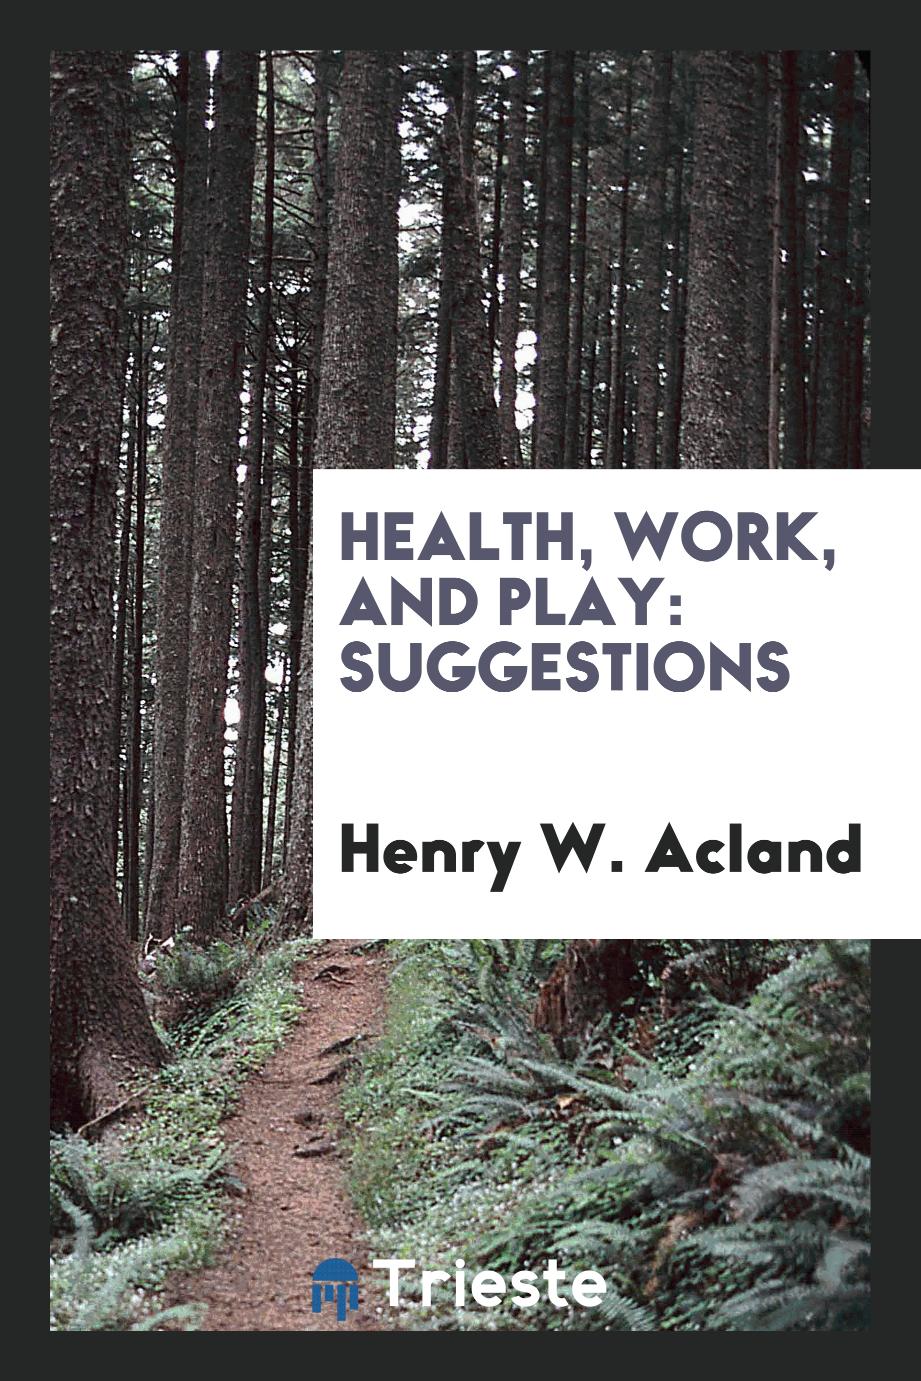 Henry W. Acland - Health, Work, and Play: Suggestions